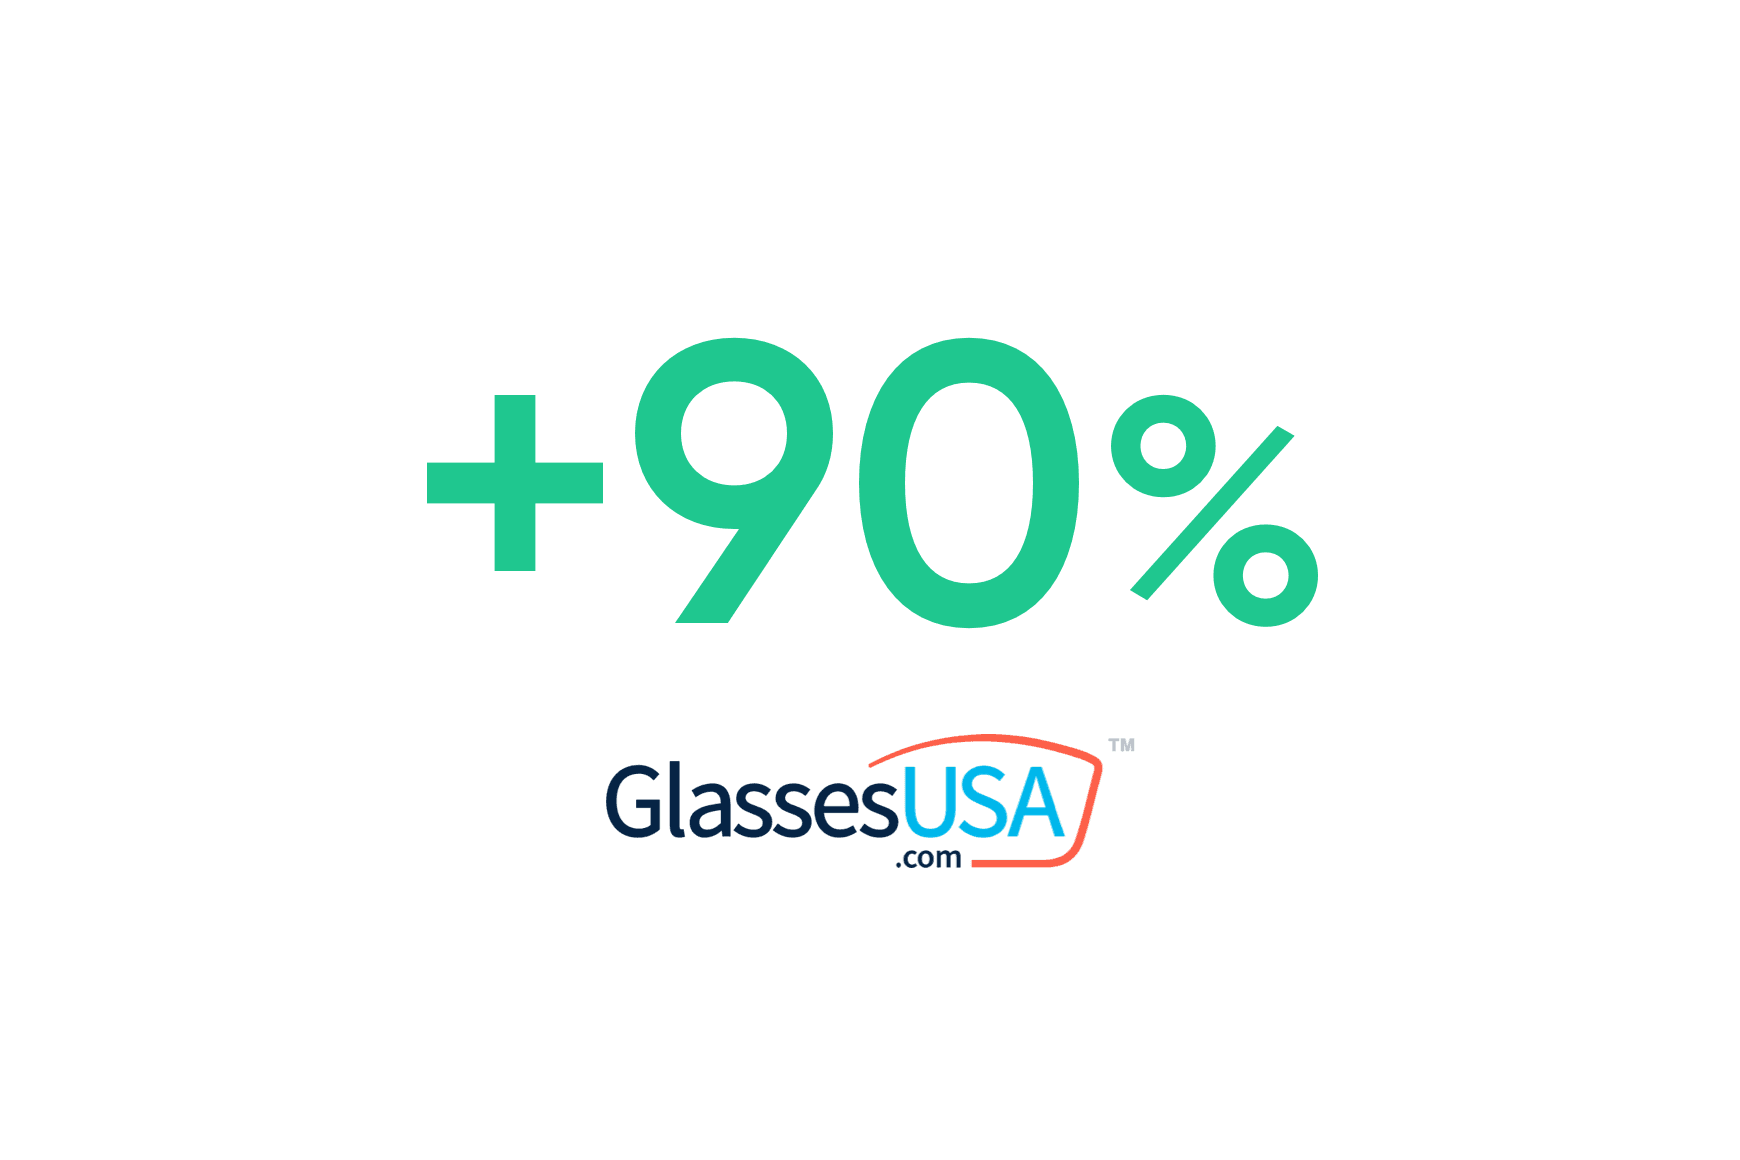 Glasses USA: Increased pickup rate to 90%